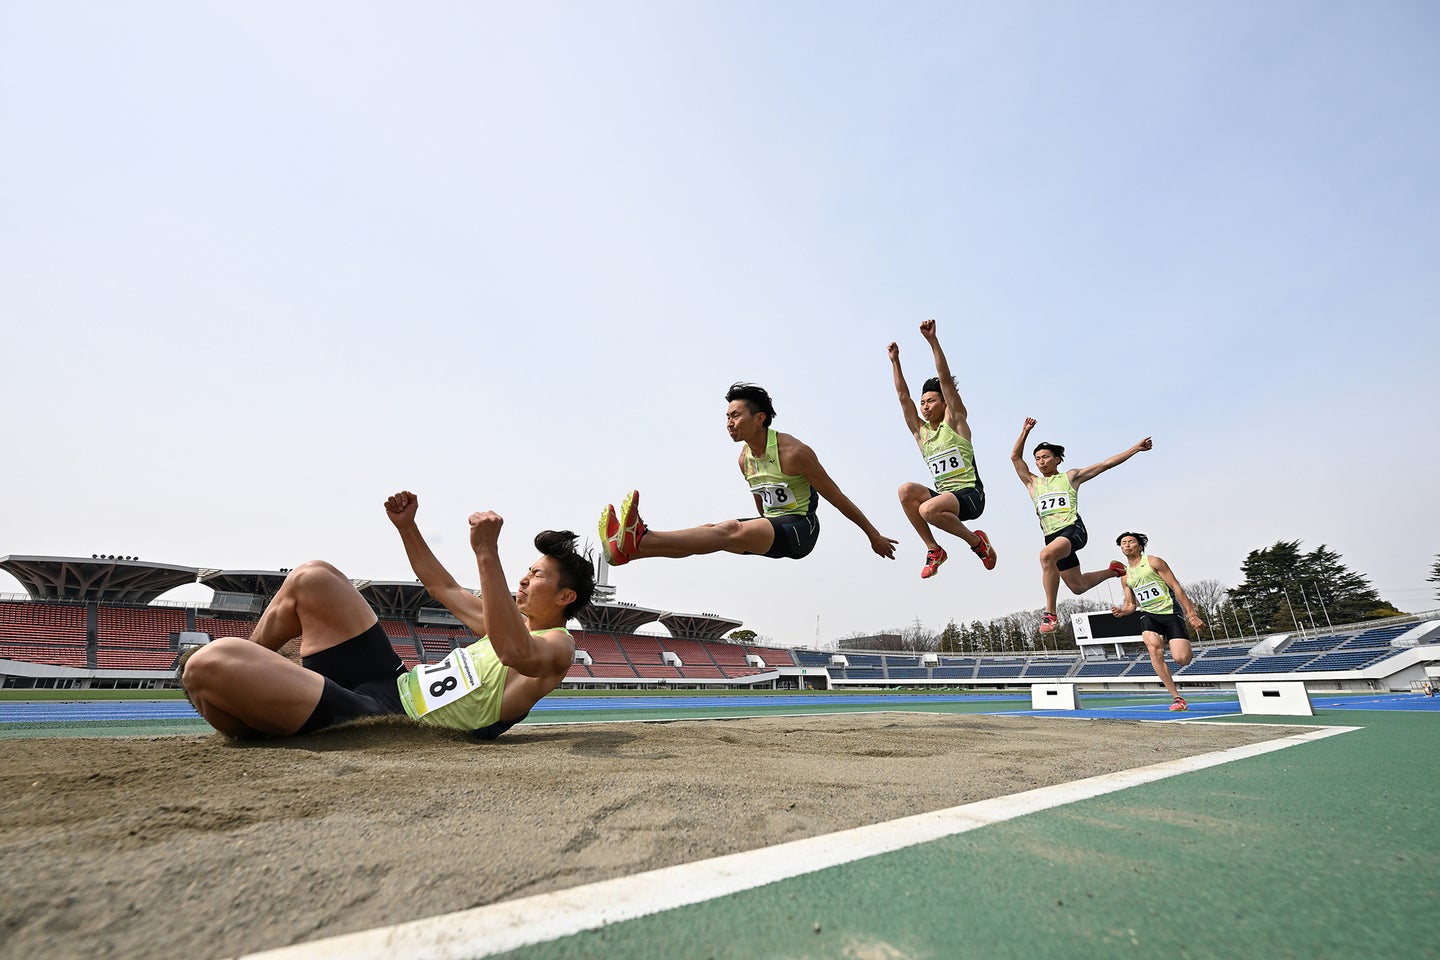 Sequence of an athlete long jumping.